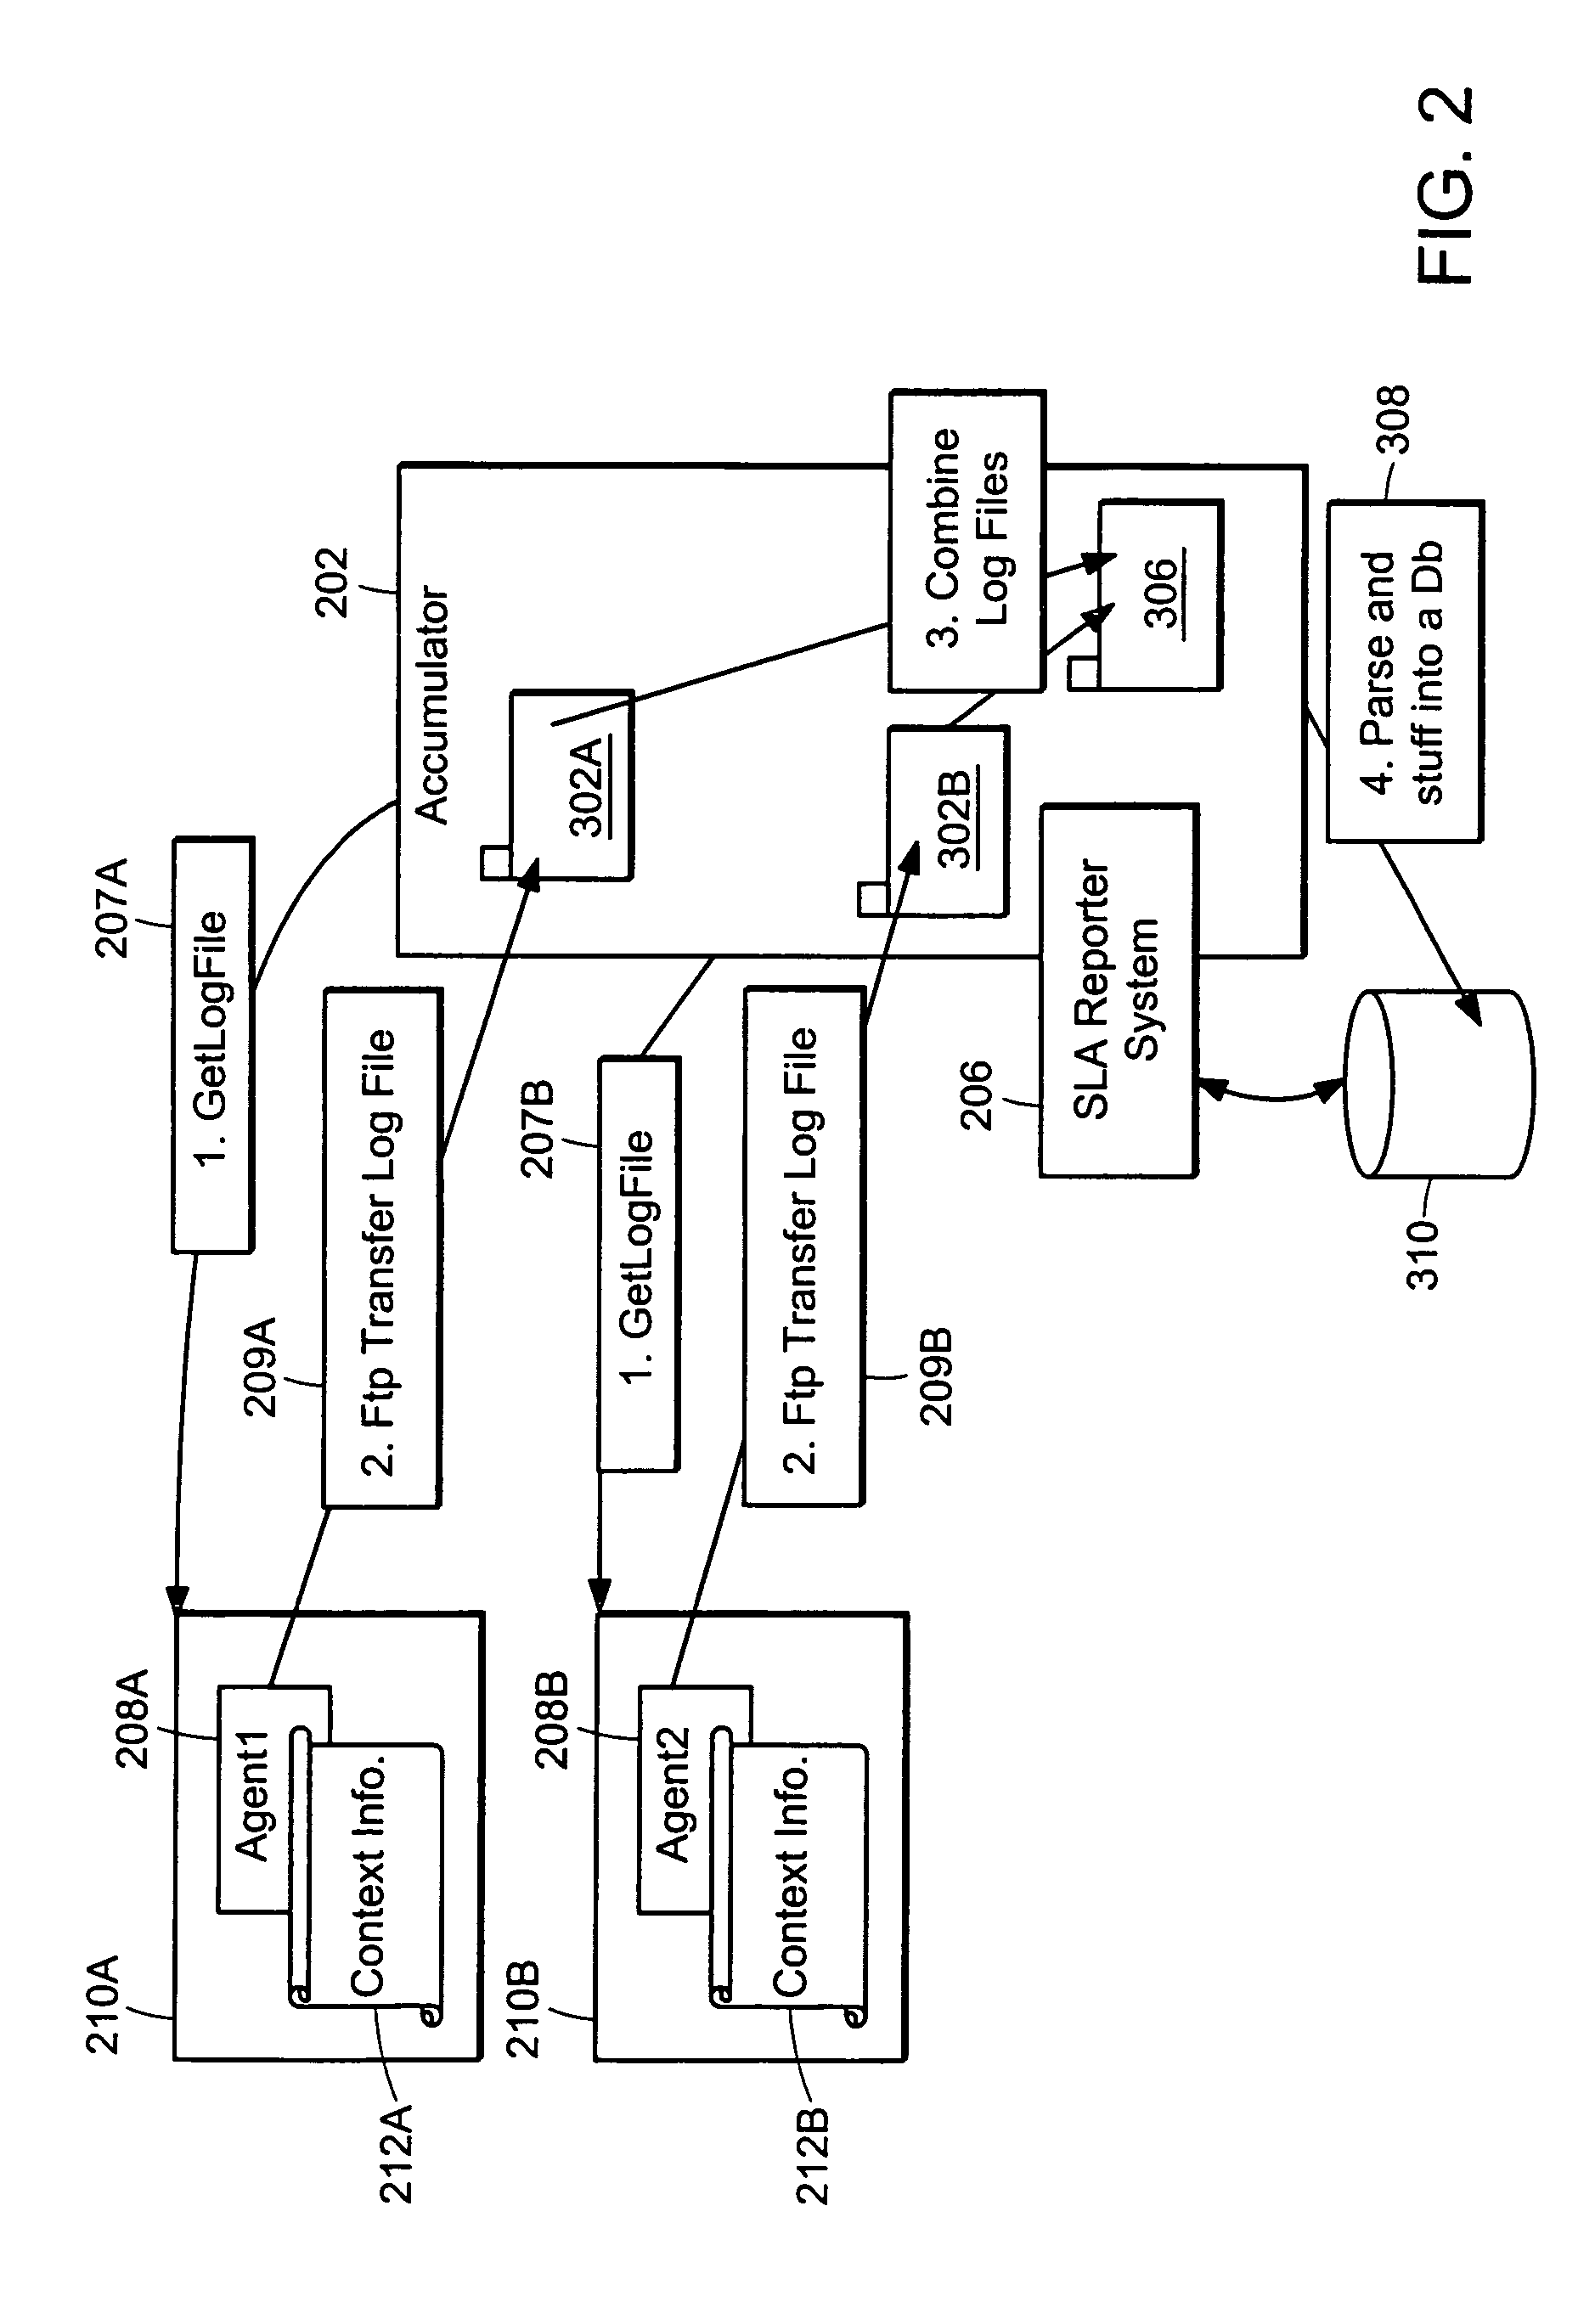 Method and apparatus for implementing a service-level agreement